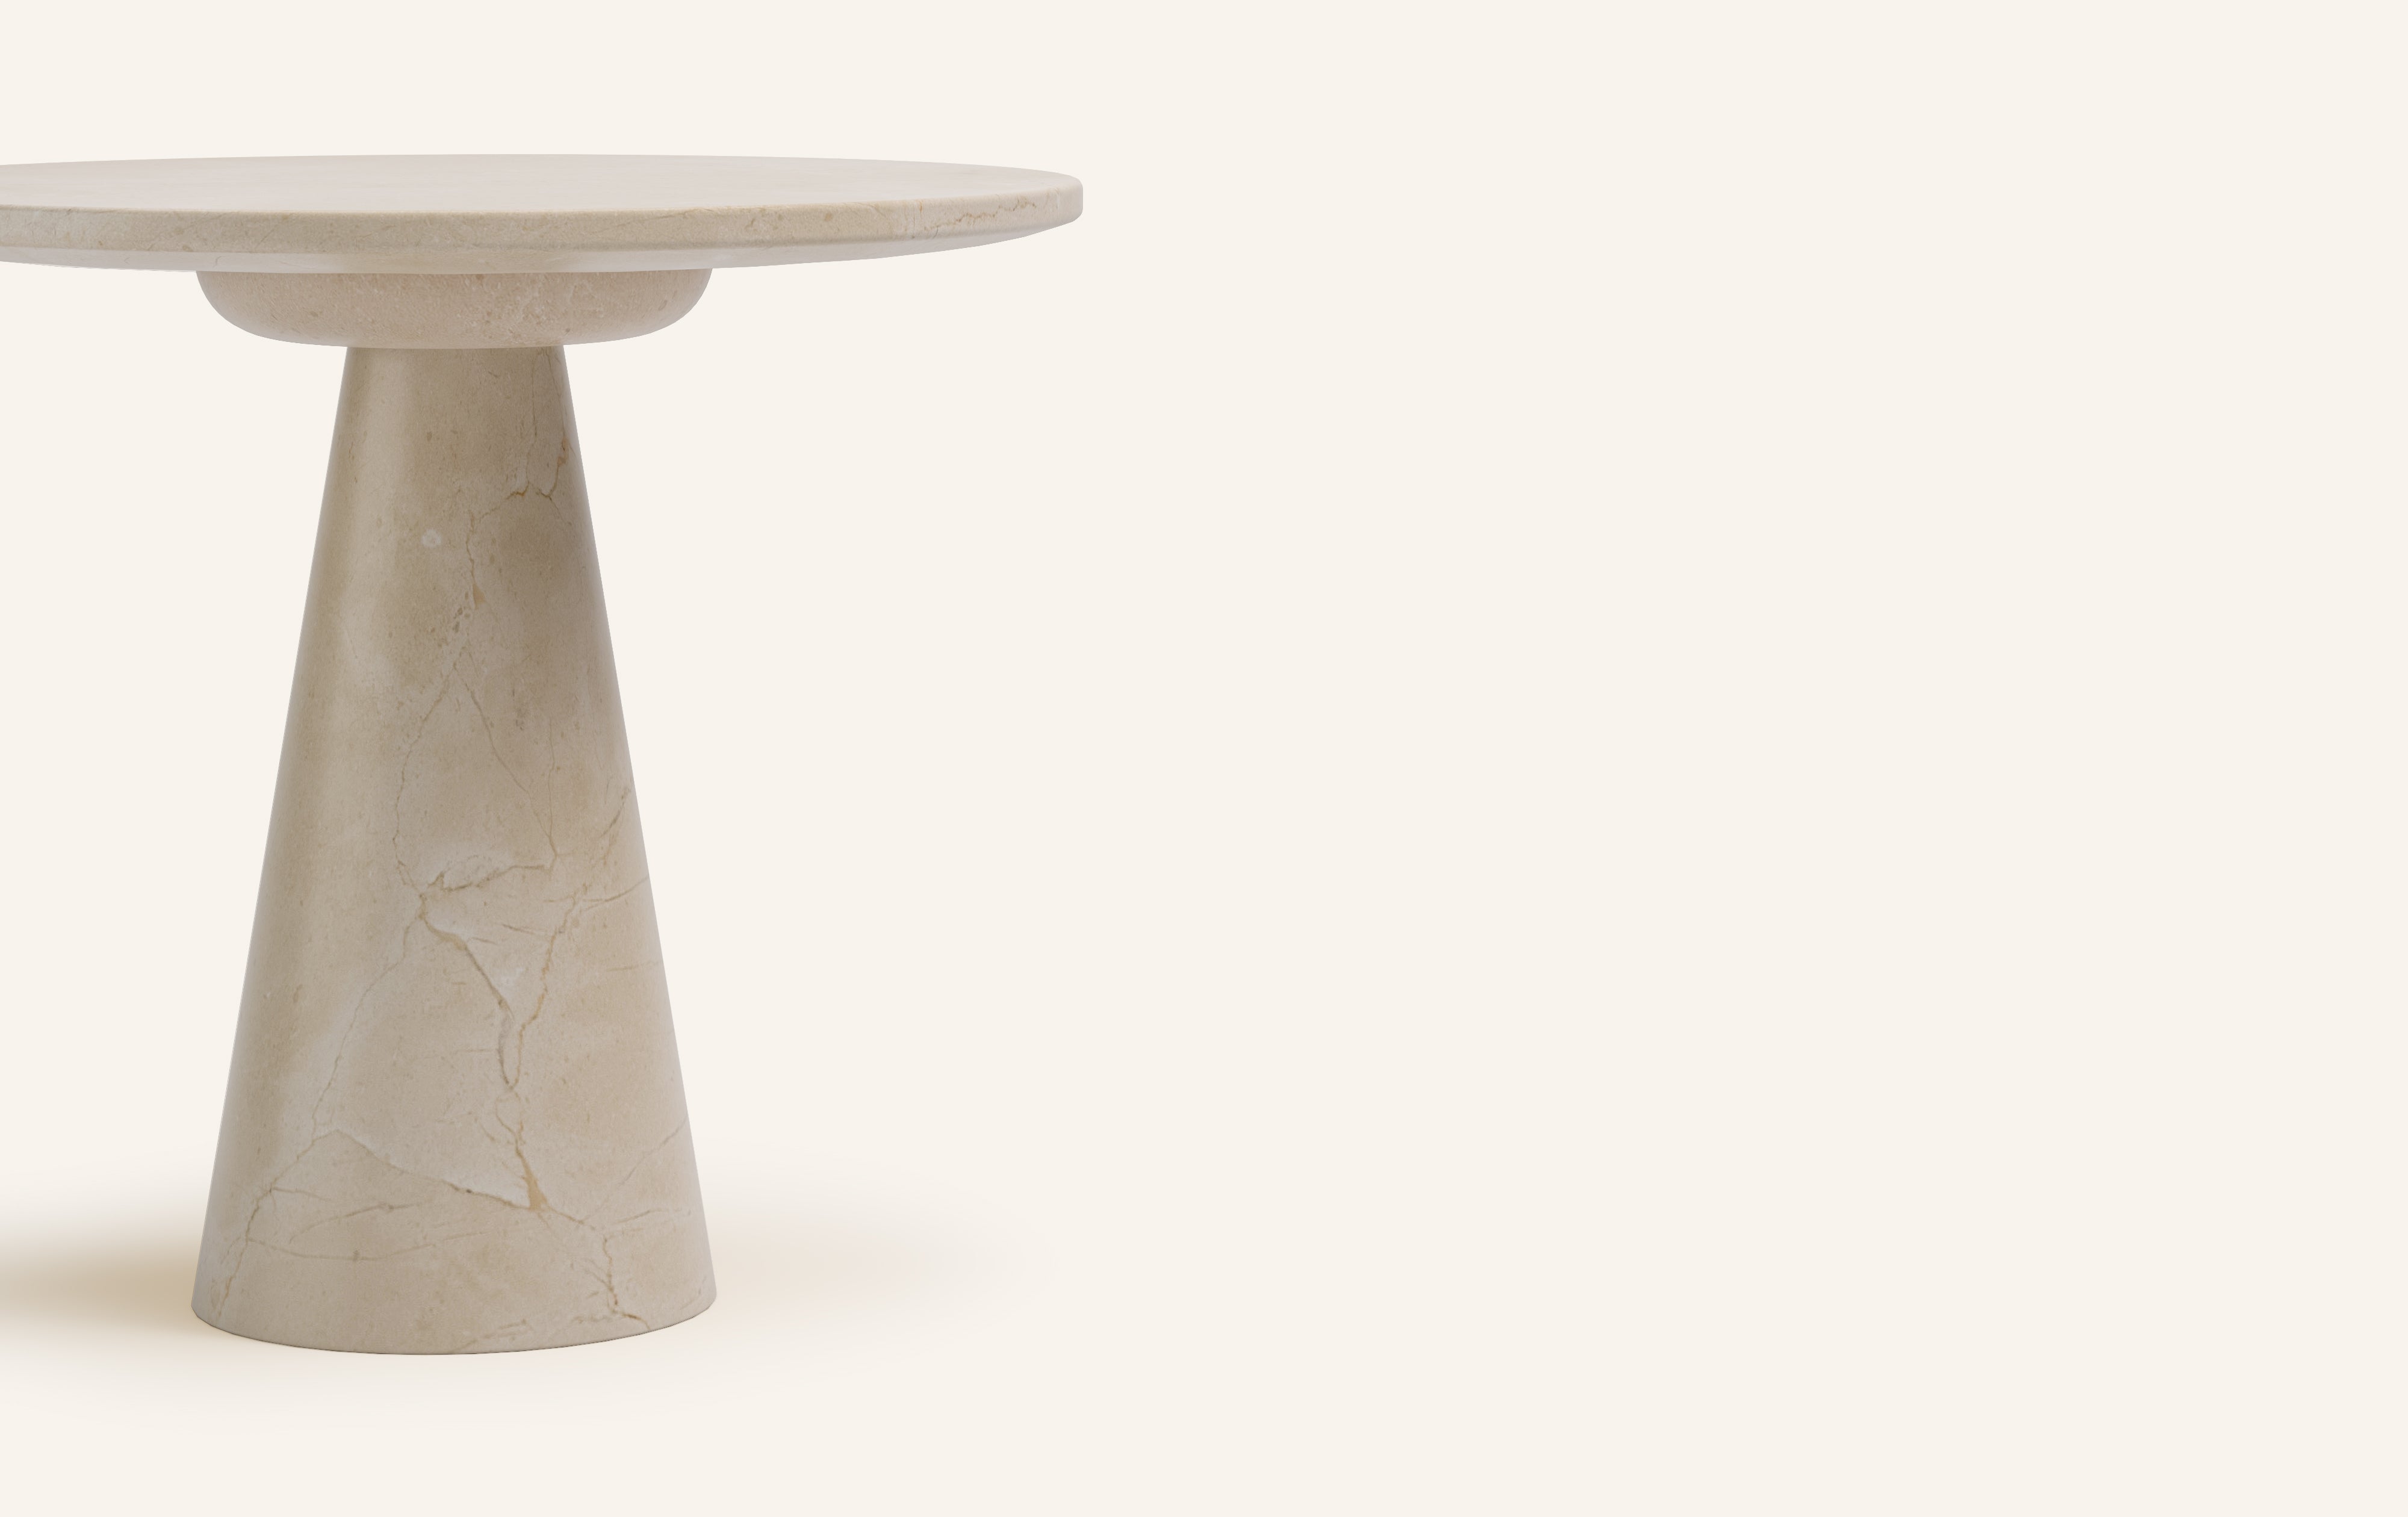 LaForma - Shop Sheffield Side Table & Furniture Online or In Store